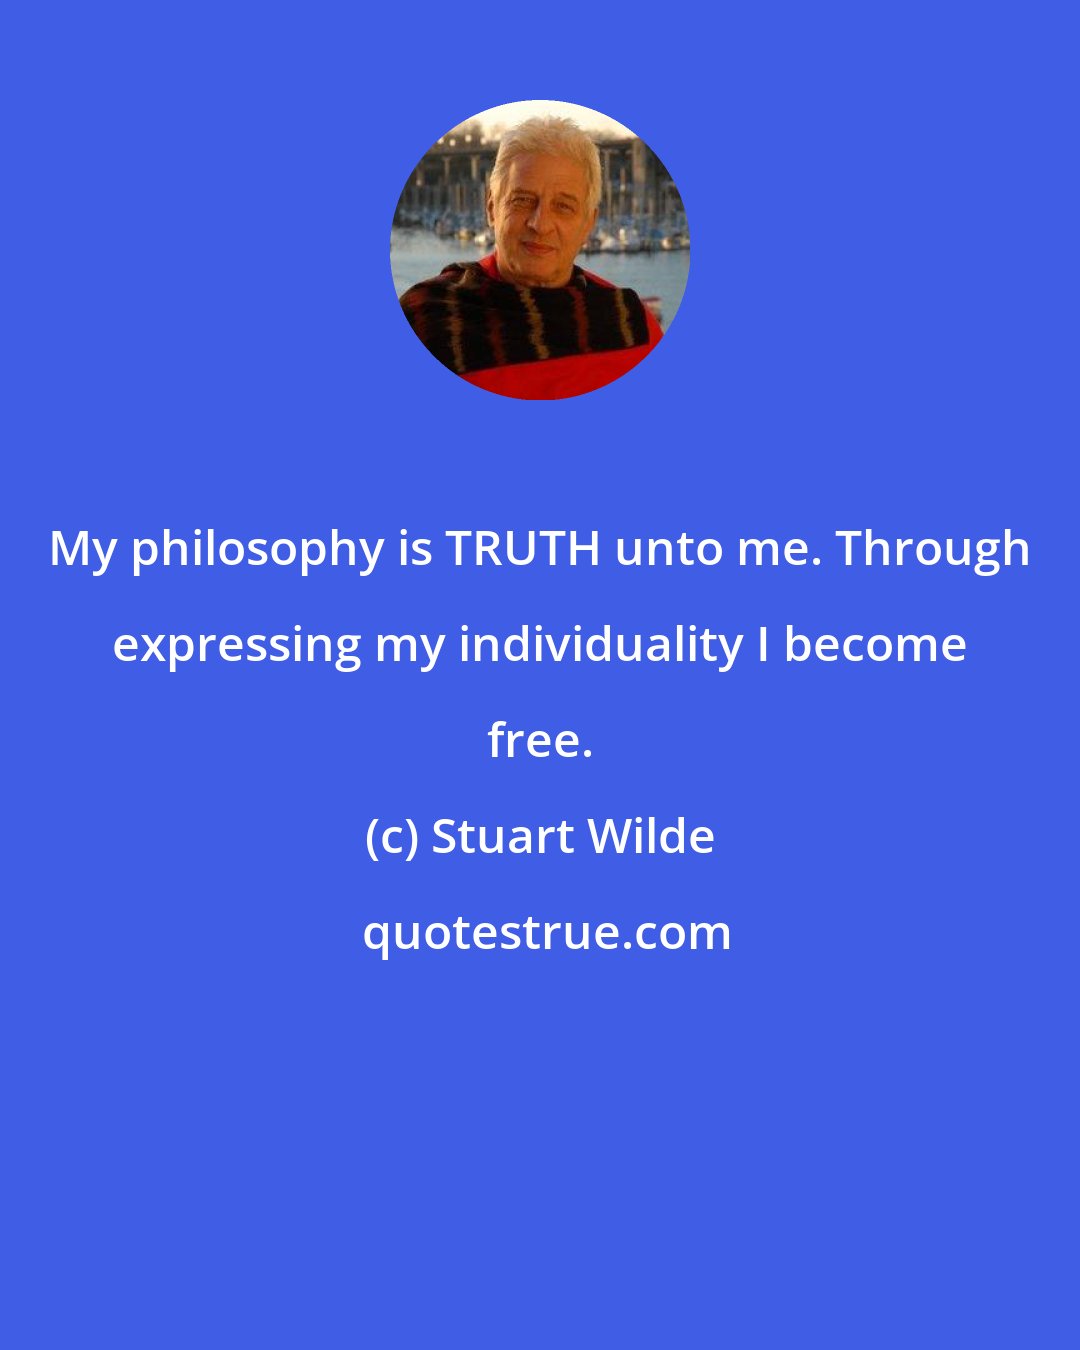 Stuart Wilde: My philosophy is TRUTH unto me. Through expressing my individuality I become free.